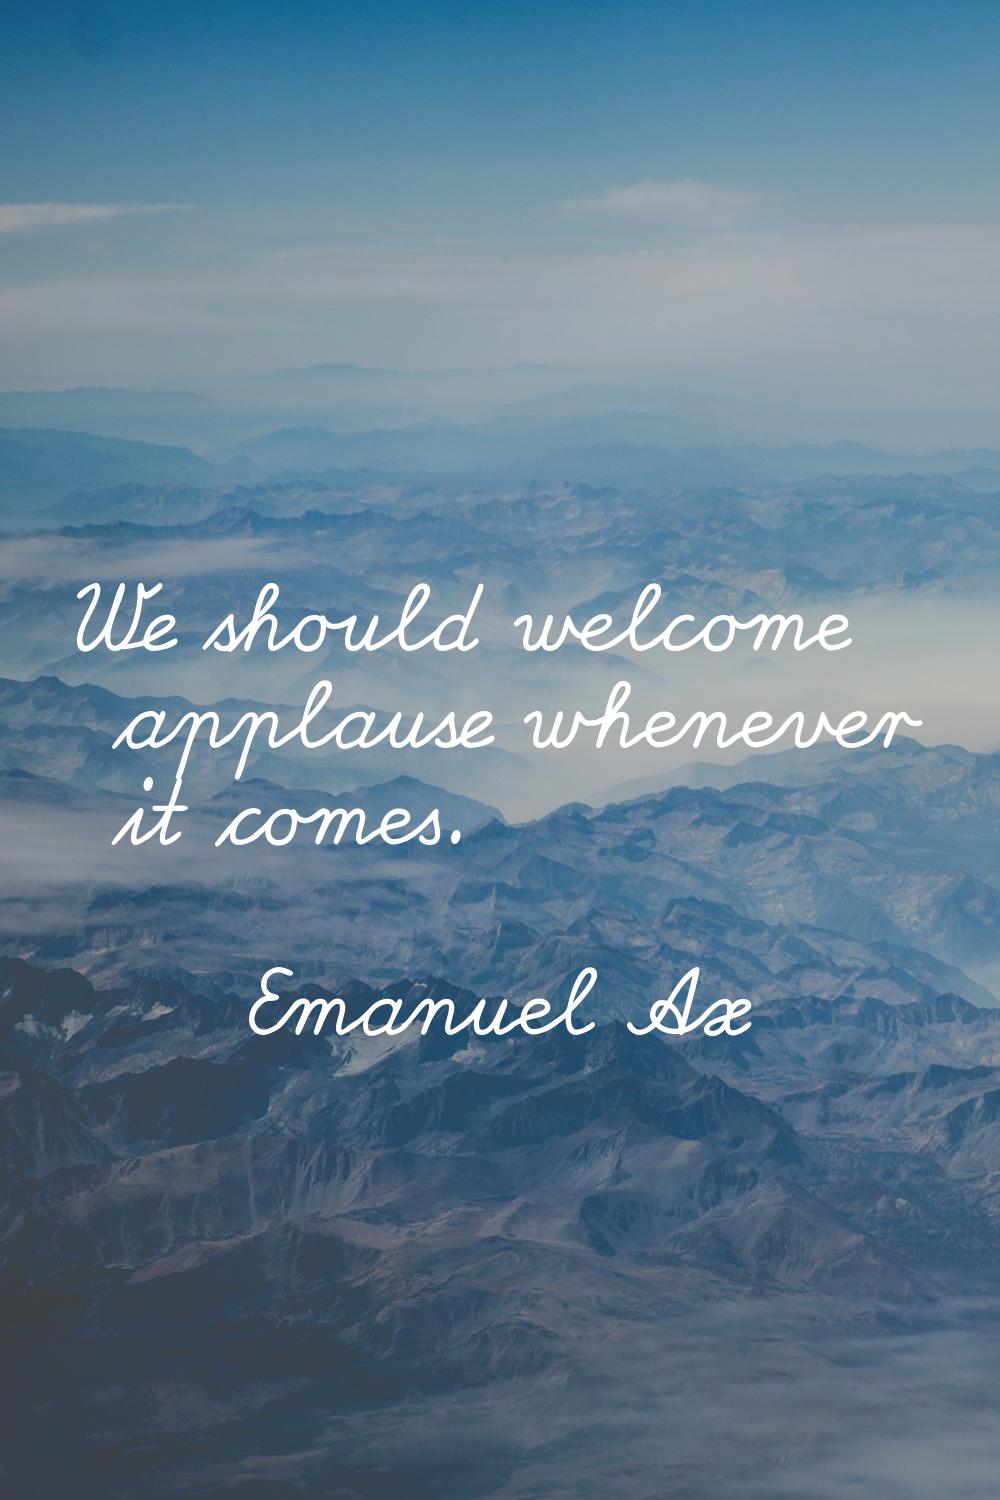 We should welcome applause whenever it comes.